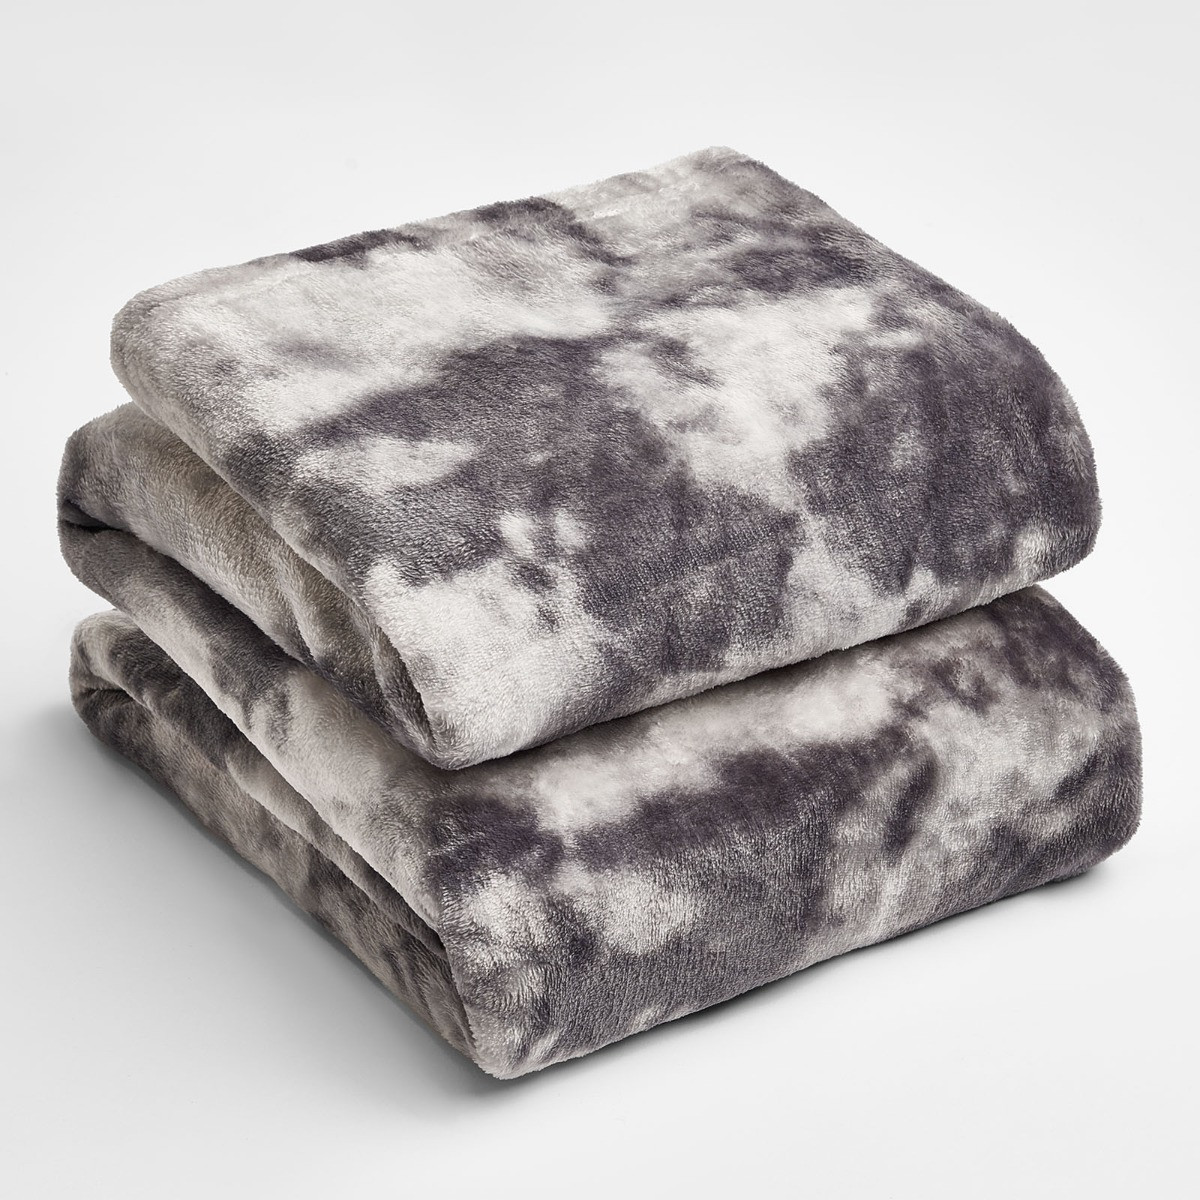 Dreamscene by OHS Tie Dye Supersoft Throw Blanket, Grey - 47 x 60 inches>